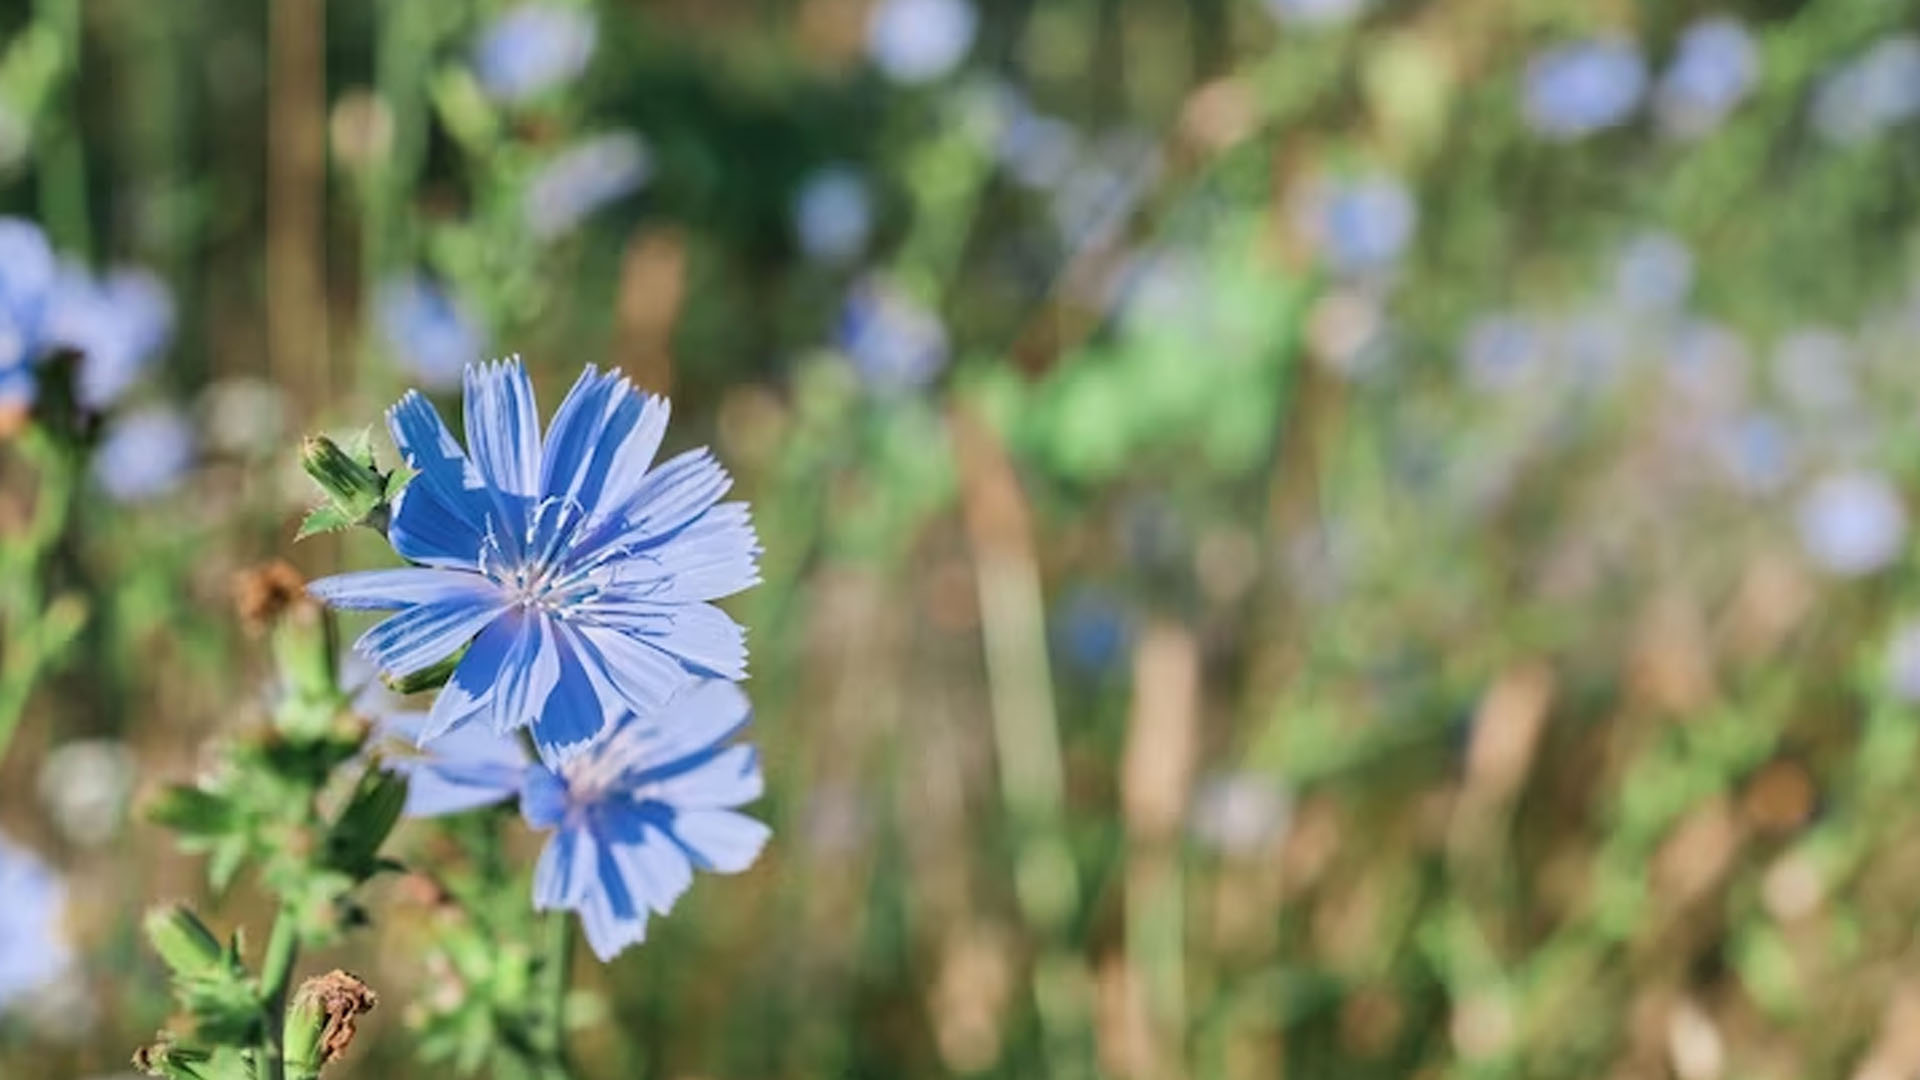 Does Chicory Have Any Health Benefits?